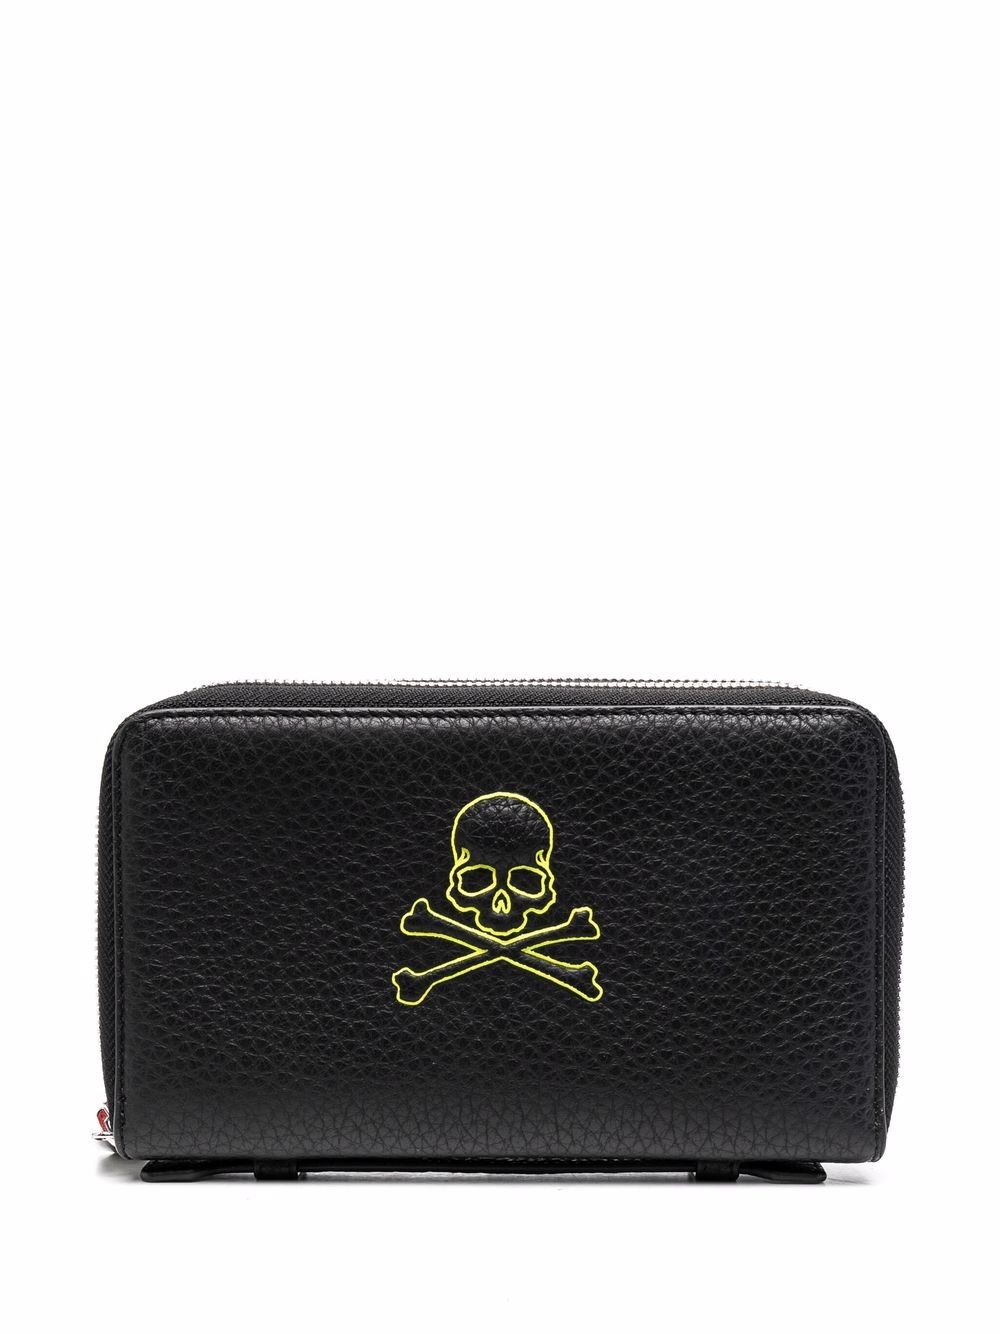 Skull embroidered double-zip leather wallet